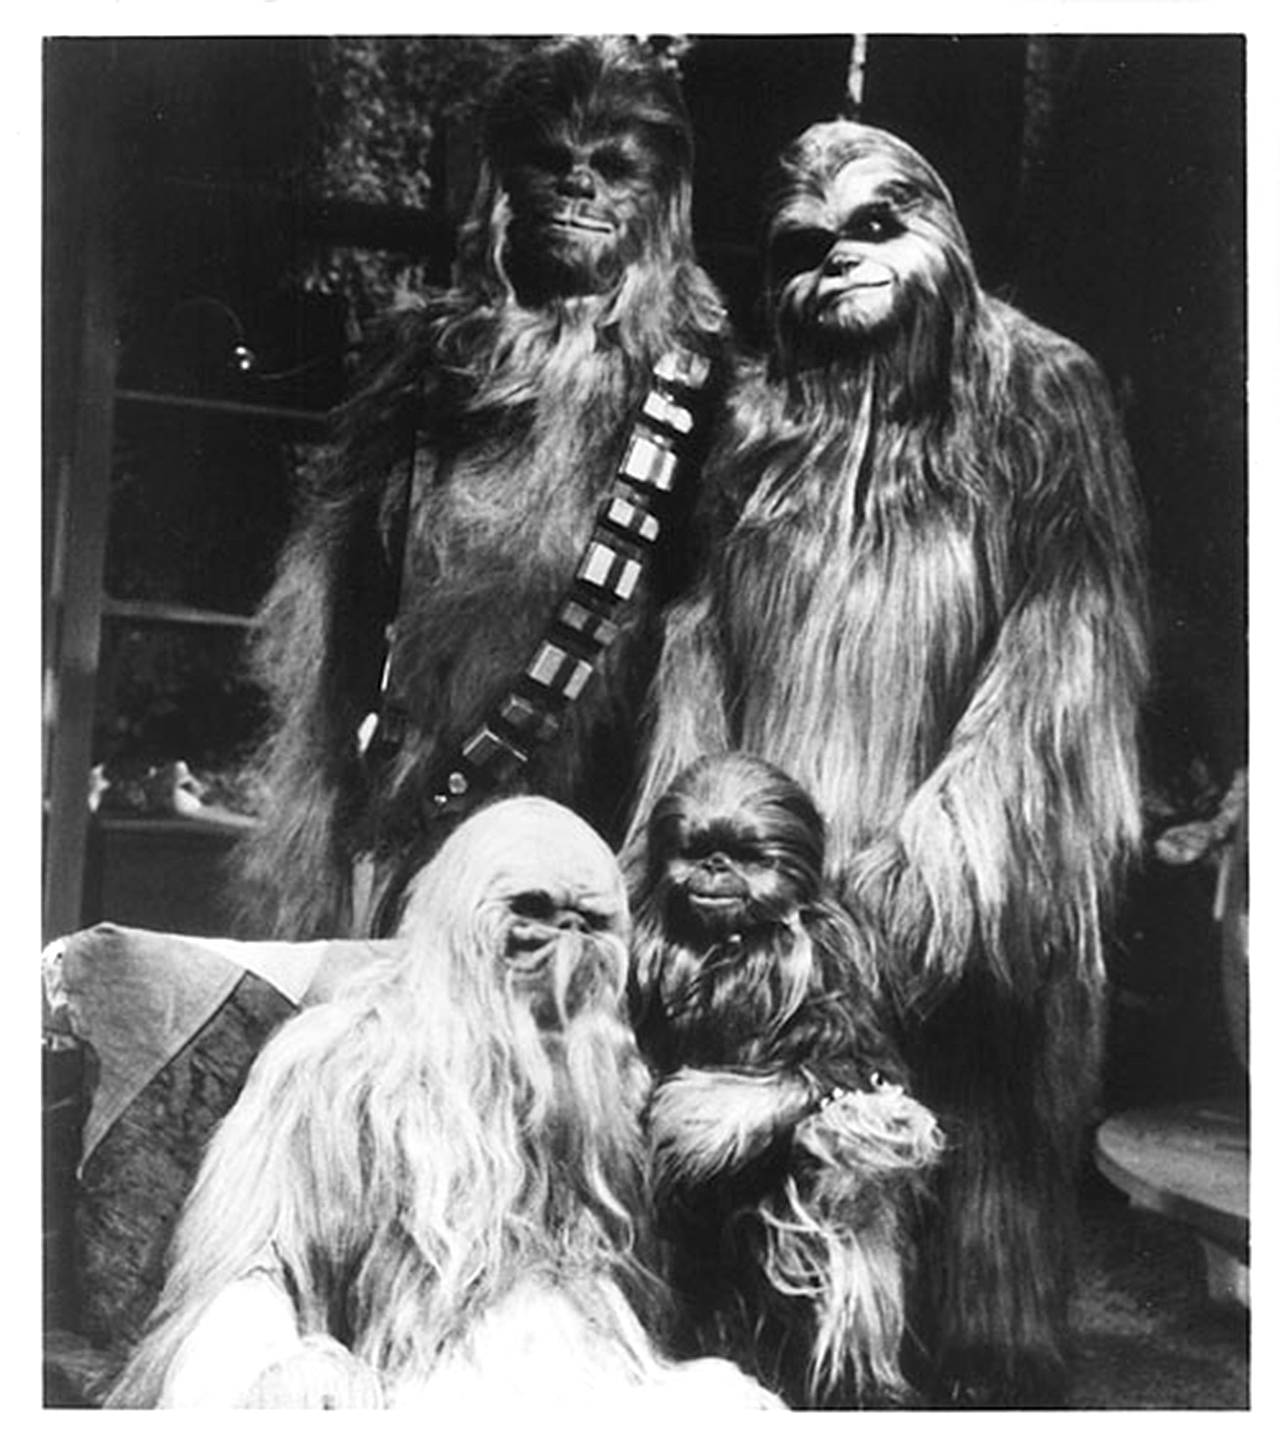 Sound designer Ben Burtt confirms in the book “The Sounds of Star Wars” by R.W. Rinzler that for the Star Wars Holiday Special he recorded several animals in Sequim for Chewbacca’s family for the TV special and later “Star Wars: Episode V — The Empire Strikes Back.” (CBS)